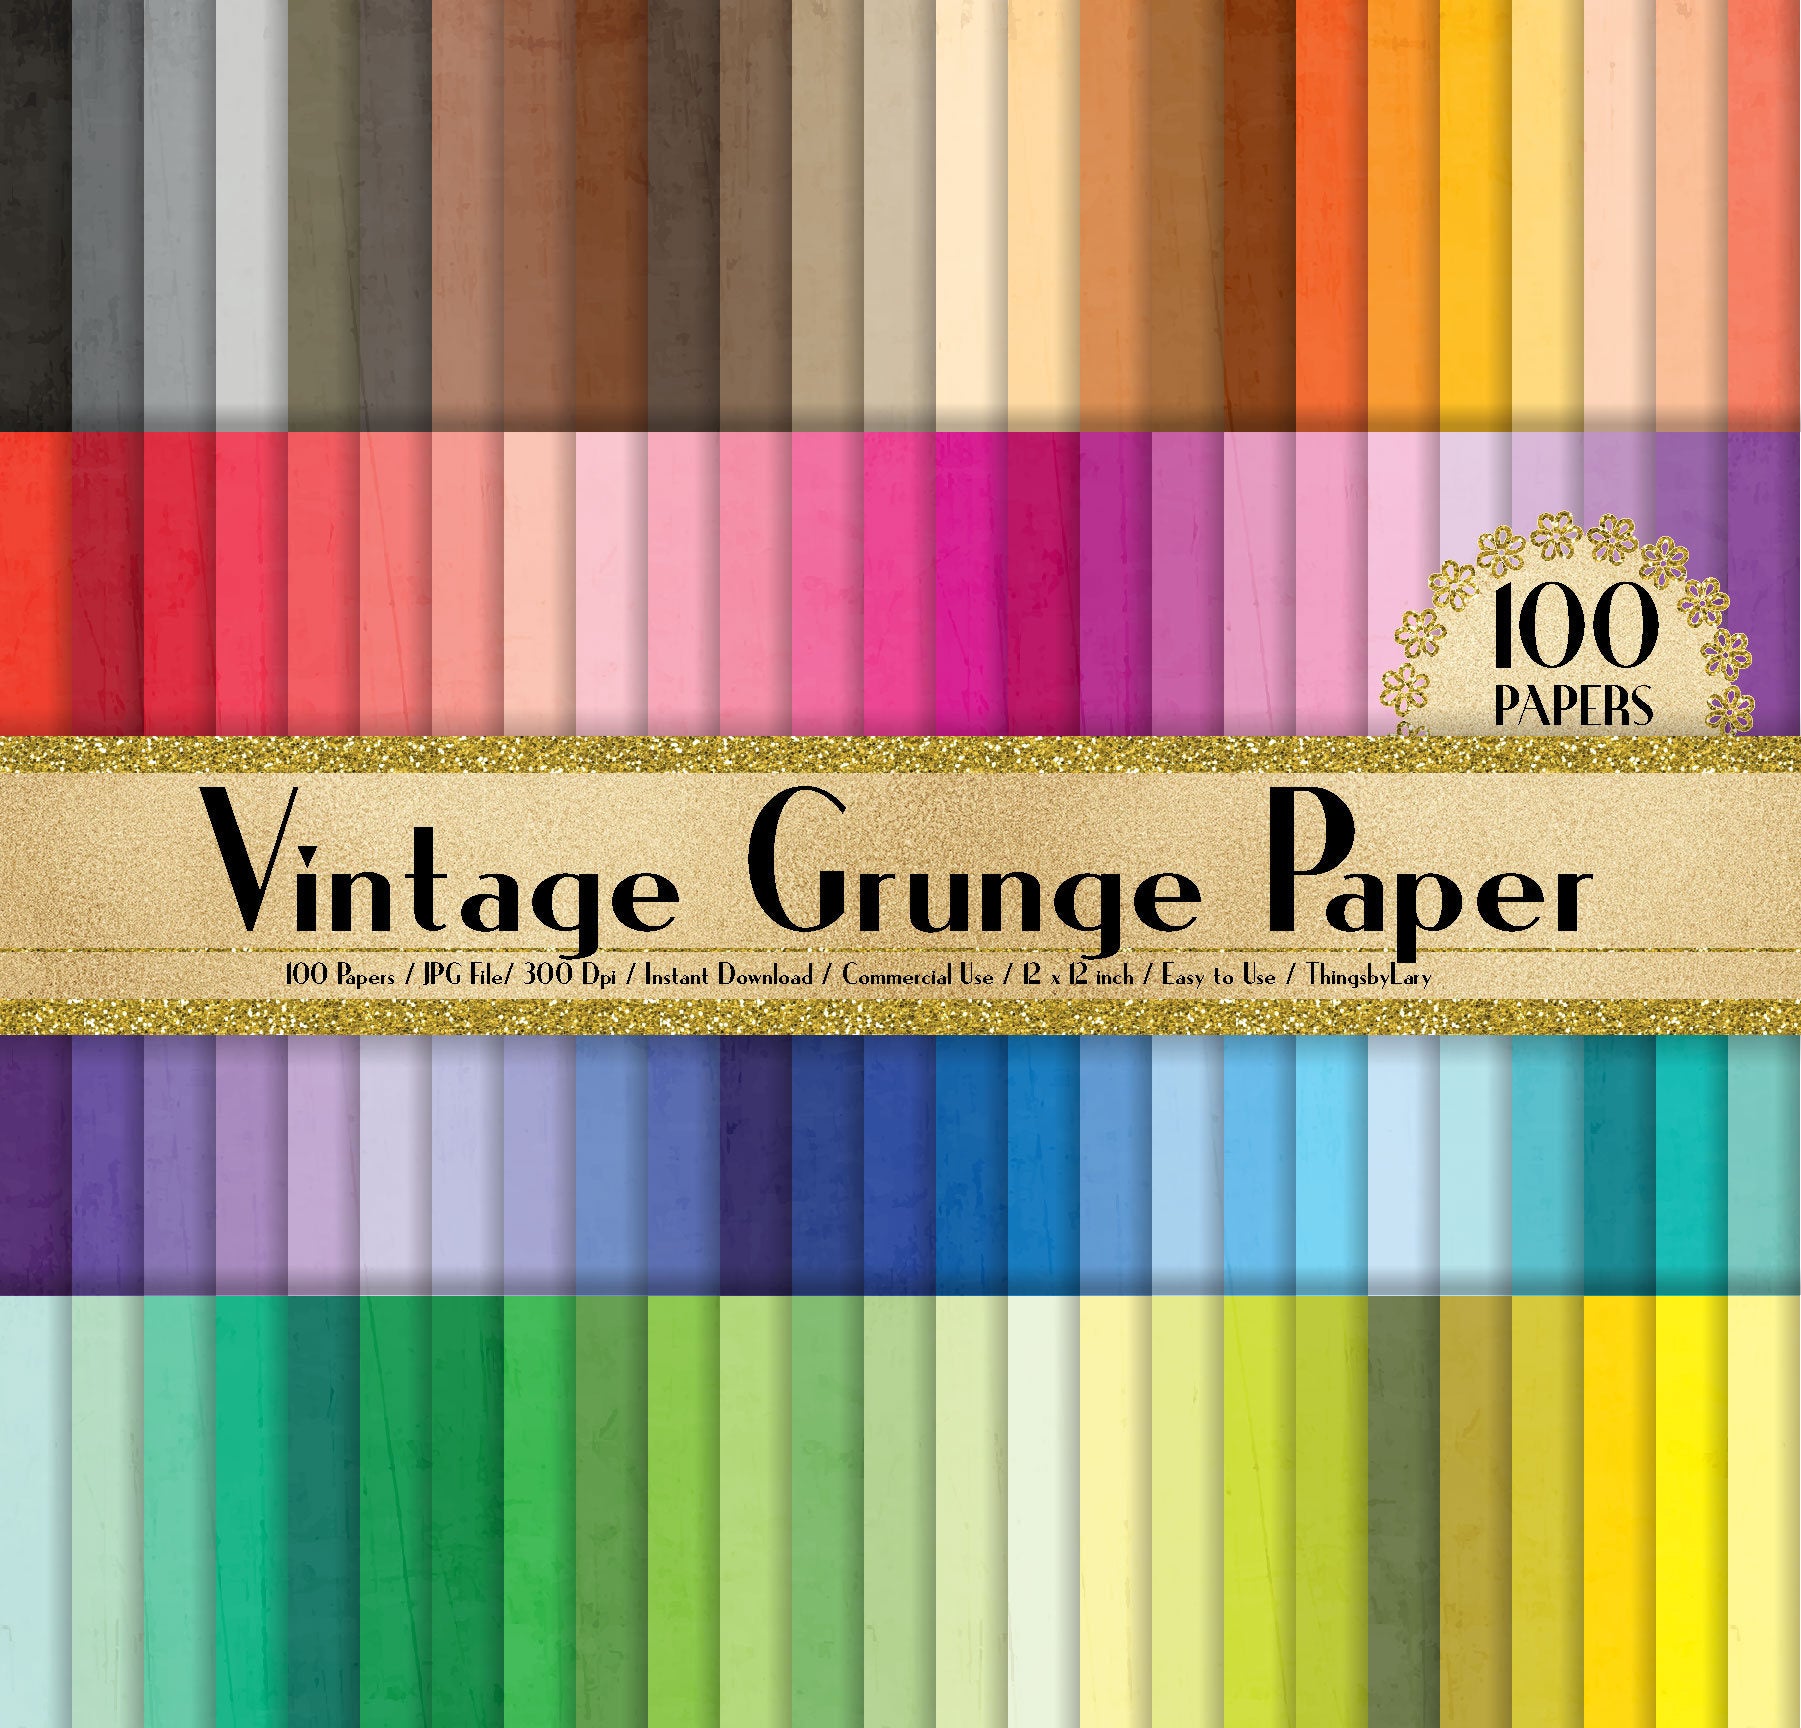 100 Vintage Grunge Texture Papers in 12 inch, 300 Dpi Planner Paper, Commercial Use, Scrapbook Paper,Rainbow Paper, 100 Vintage Papers